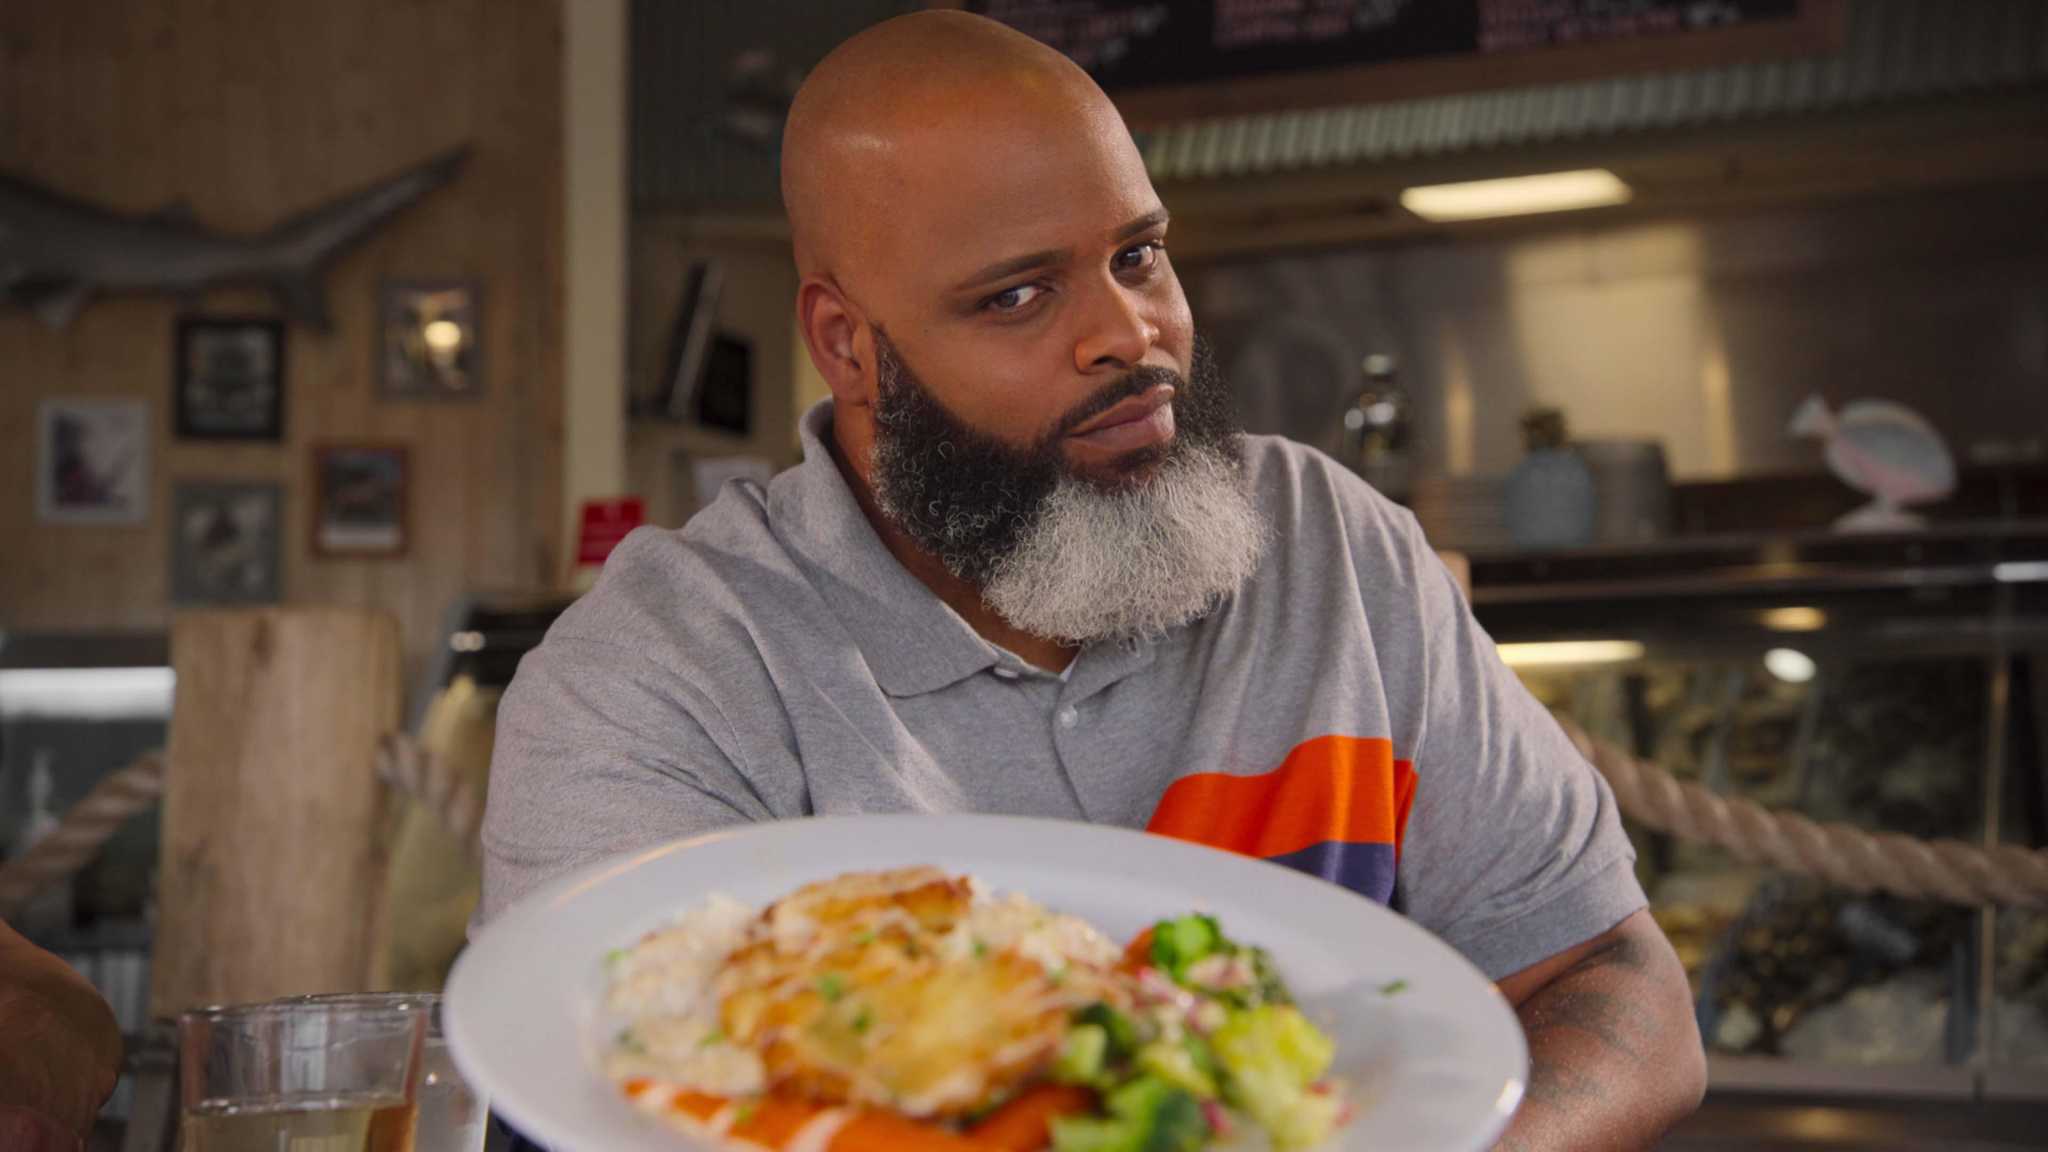 Youtube Star Daym Drops Gets His Own Netflix Series ‘fresh Fried And Crispy